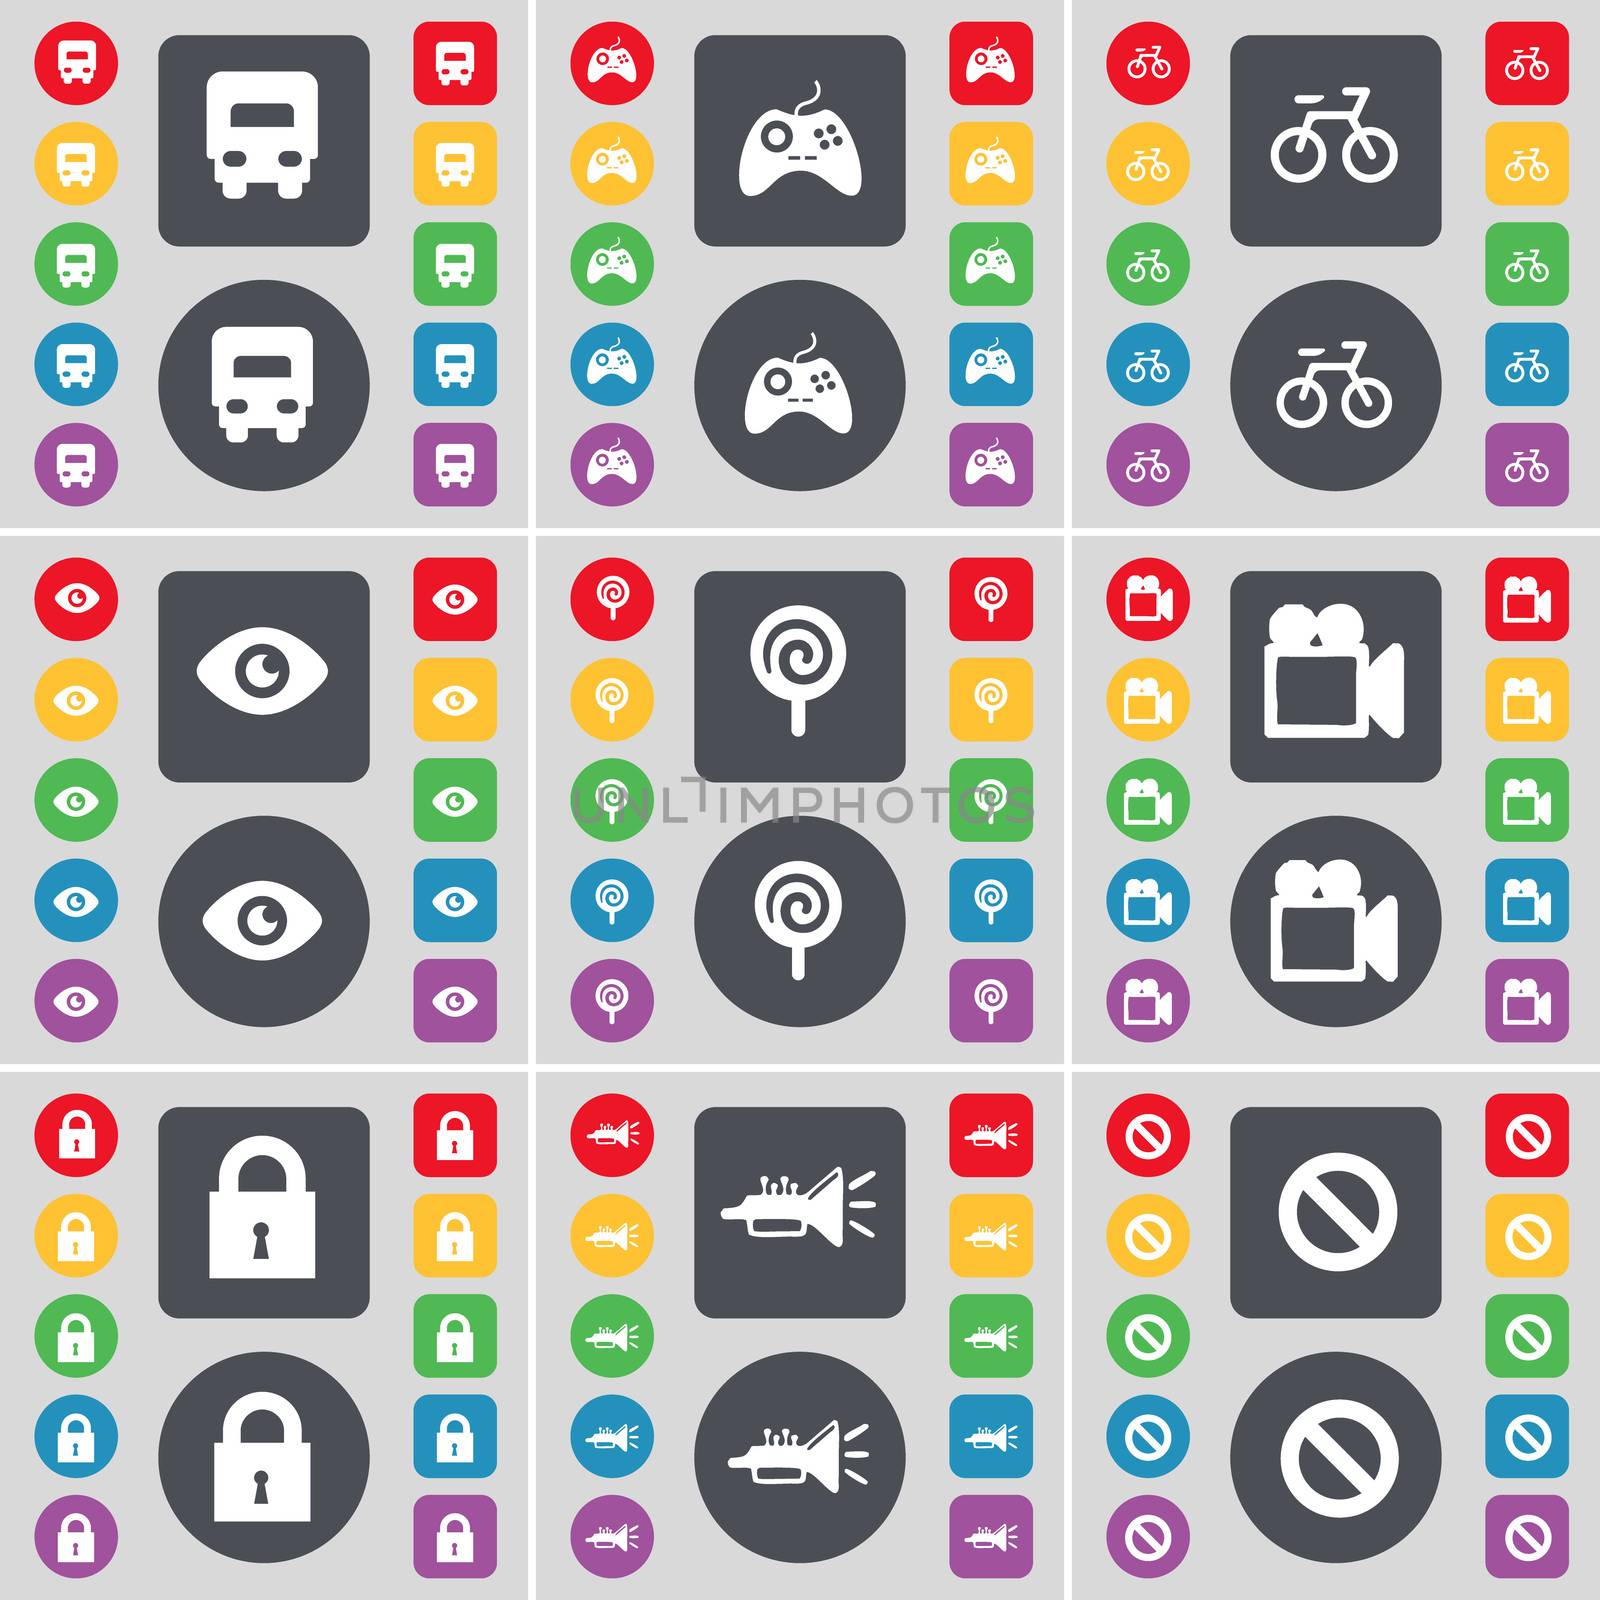 Truck, Gamepad, Bicycle, Vision, Lollipop, Film camera, Lock, Trumped, Stop icon symbol. A large set of flat, colored buttons for your design.  by serhii_lohvyniuk